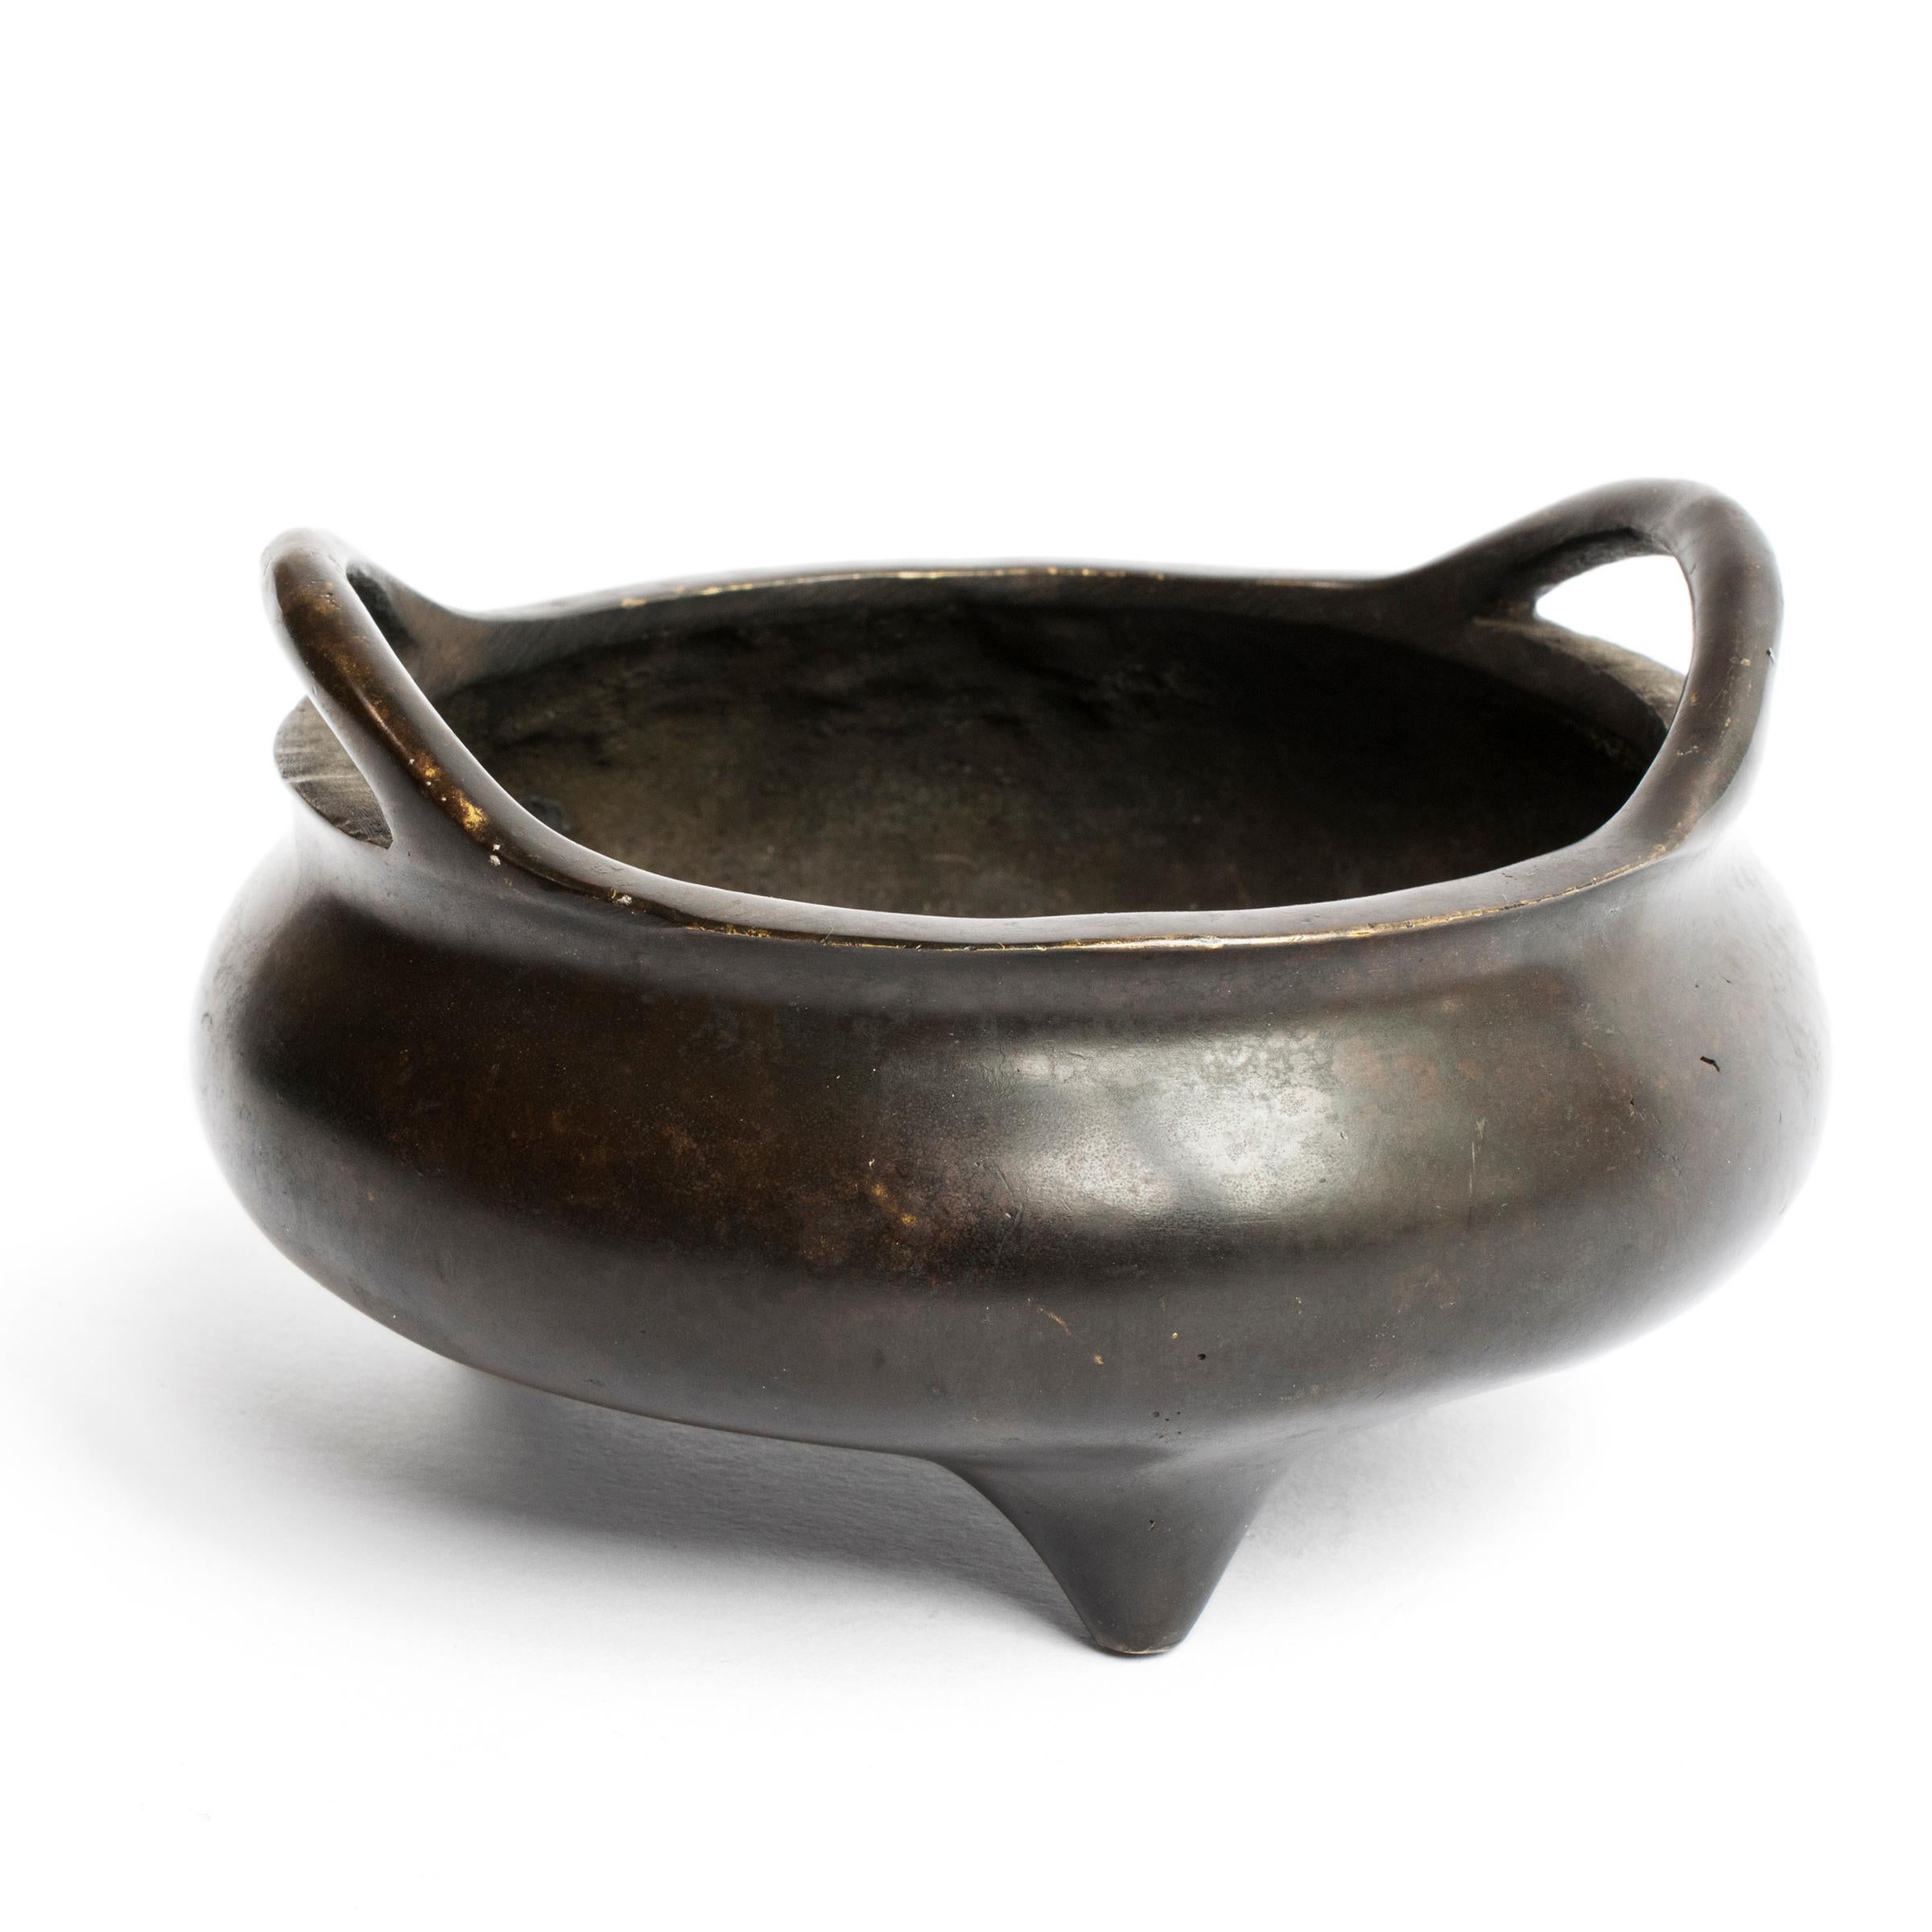 20th Century Chinese Bronze Tripod Censer with Strap Handles, c. 1900 For Sale